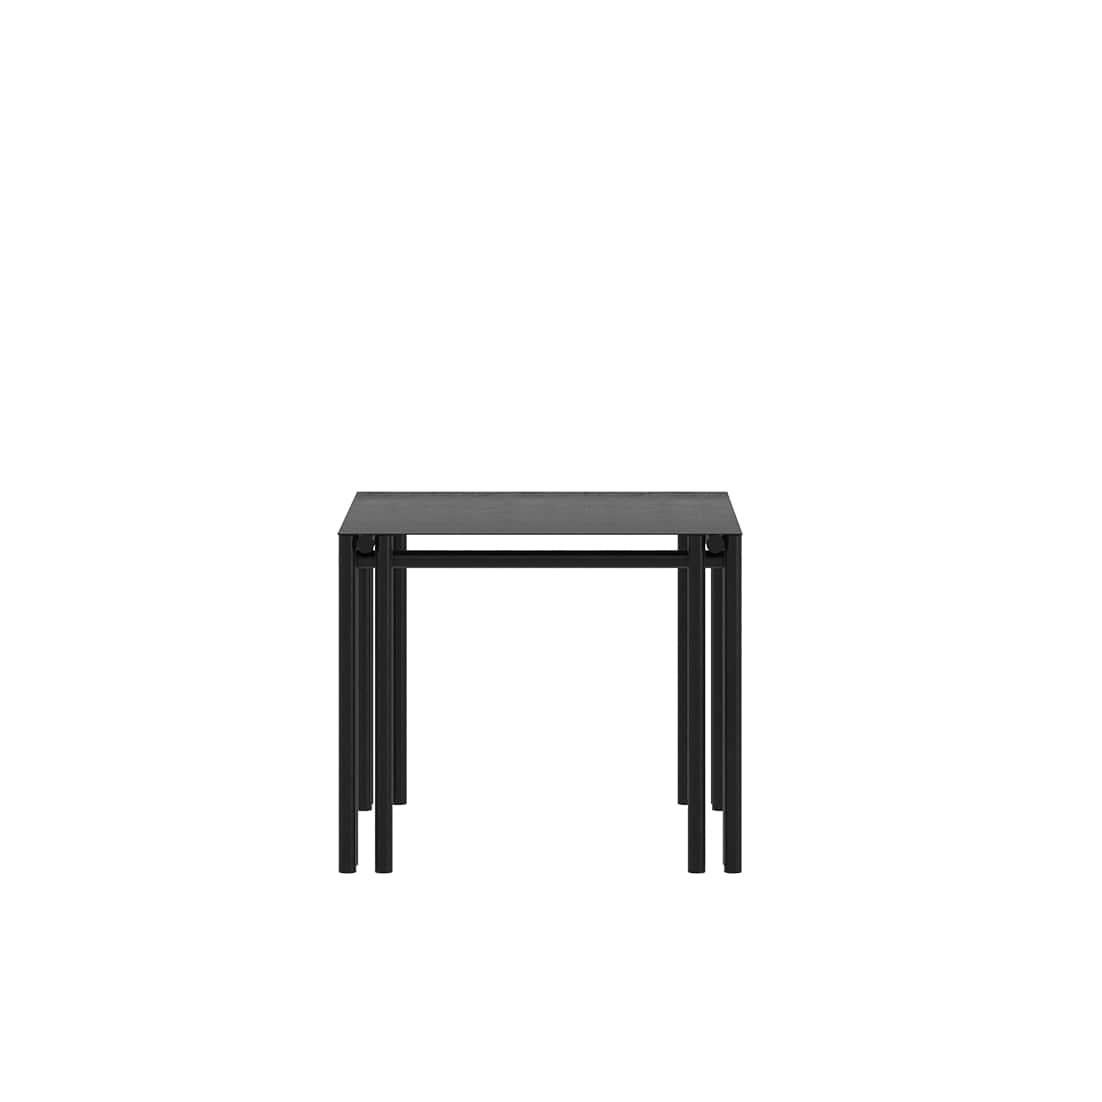 Mexican White Dolmen Square Dining Table For Sale